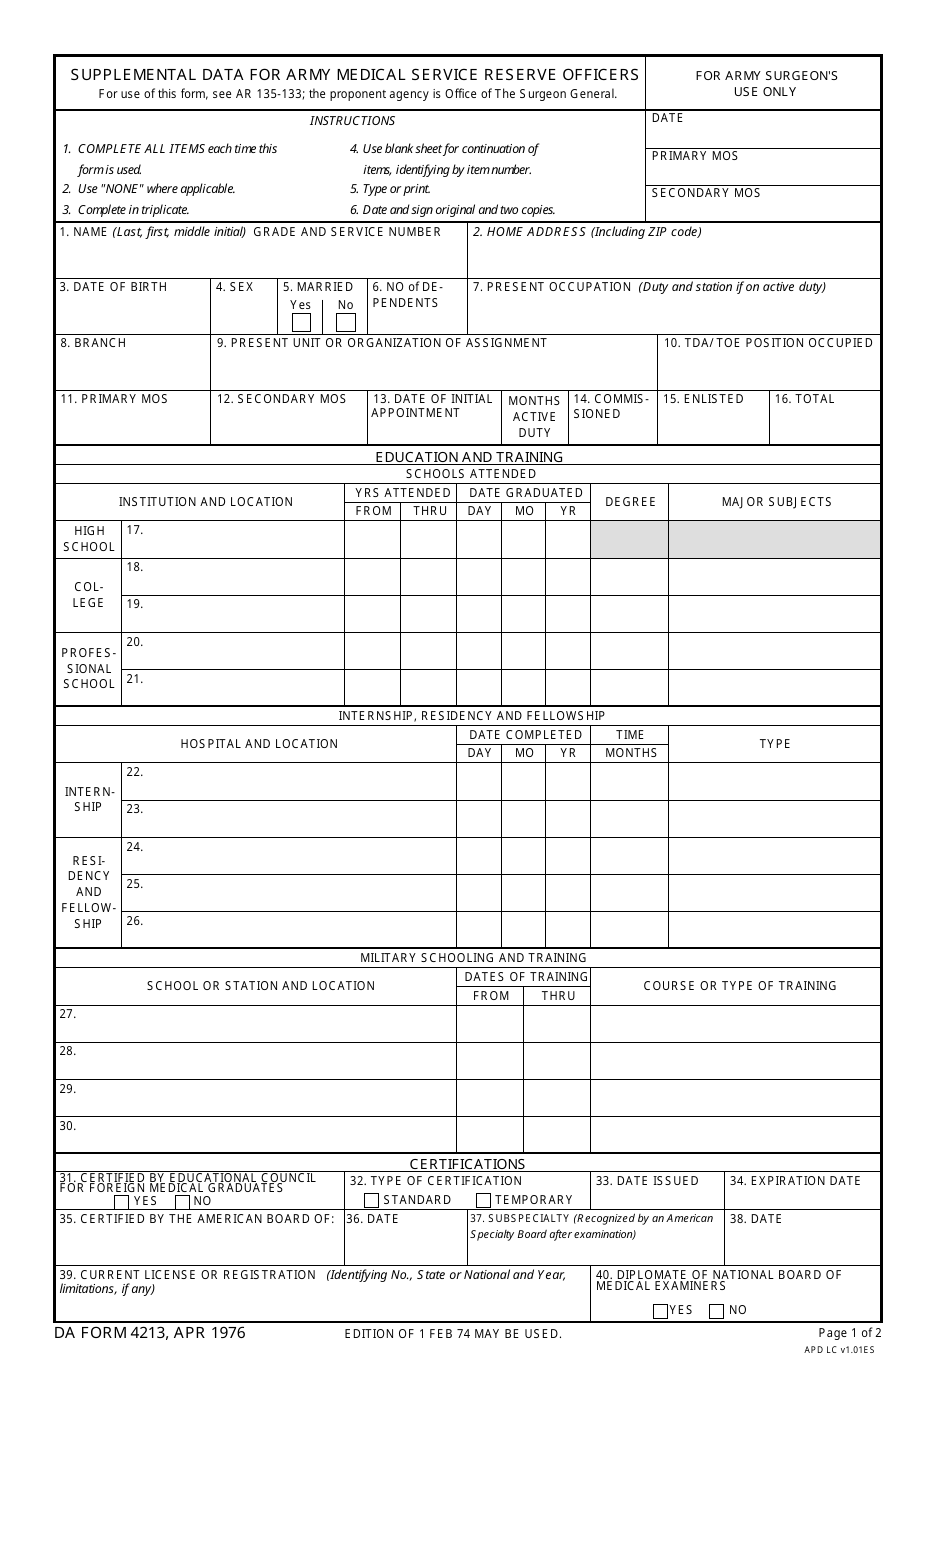 DA Form 4213 Supplemental Data for Army Medical Service Reserve Officers, Page 1